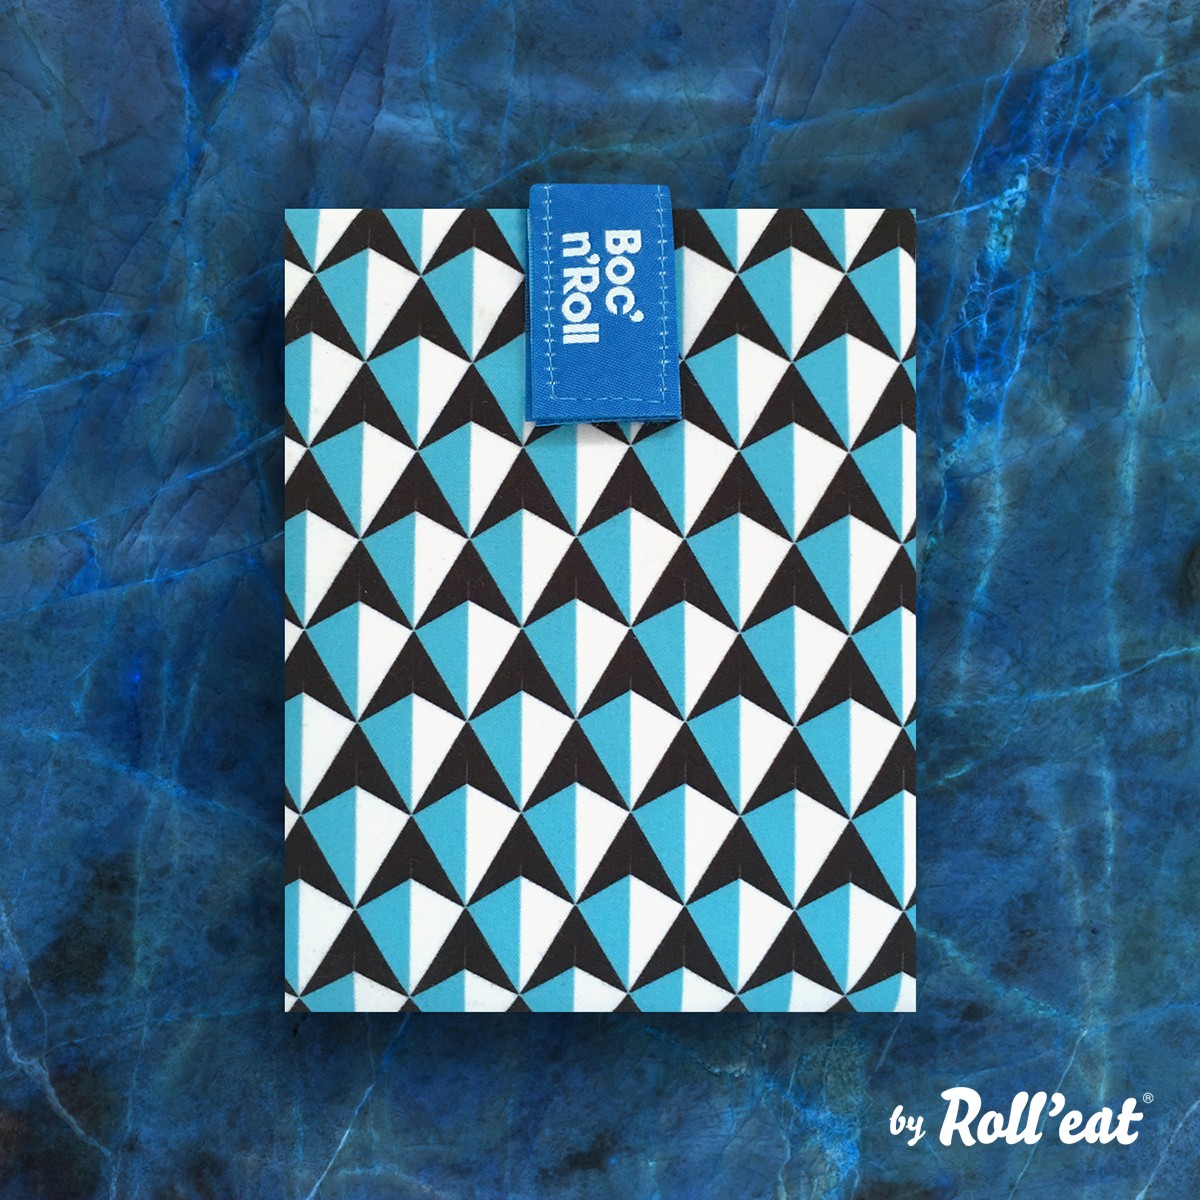  Roll'eat ® Boc'n'Roll and Snack'n'Go Pack Blue Color, Includes  Reusable Sandwich Wrap and Snacks or Sandwich Bag, Eco Friendly Food Bag